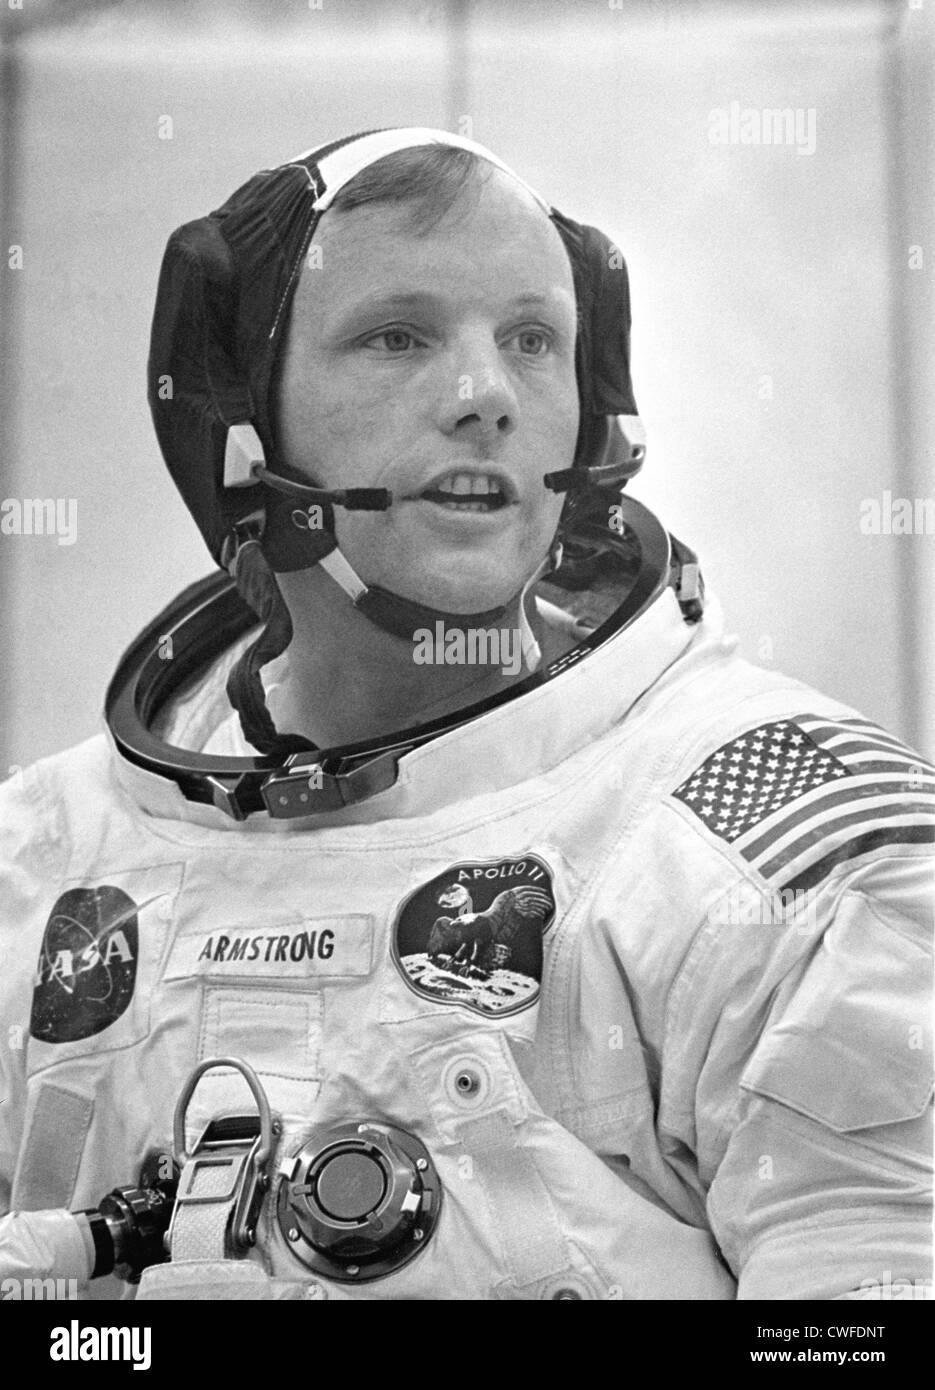 NASA Astronaut Neil A. Armstrong and Apollo 11 Spacecraft Commander in his space suit before boarding Saturn V launch vehicle on the first manned lunar mission July 16, 1969 at the Kennedy Space Center, Florida. Stock Photo